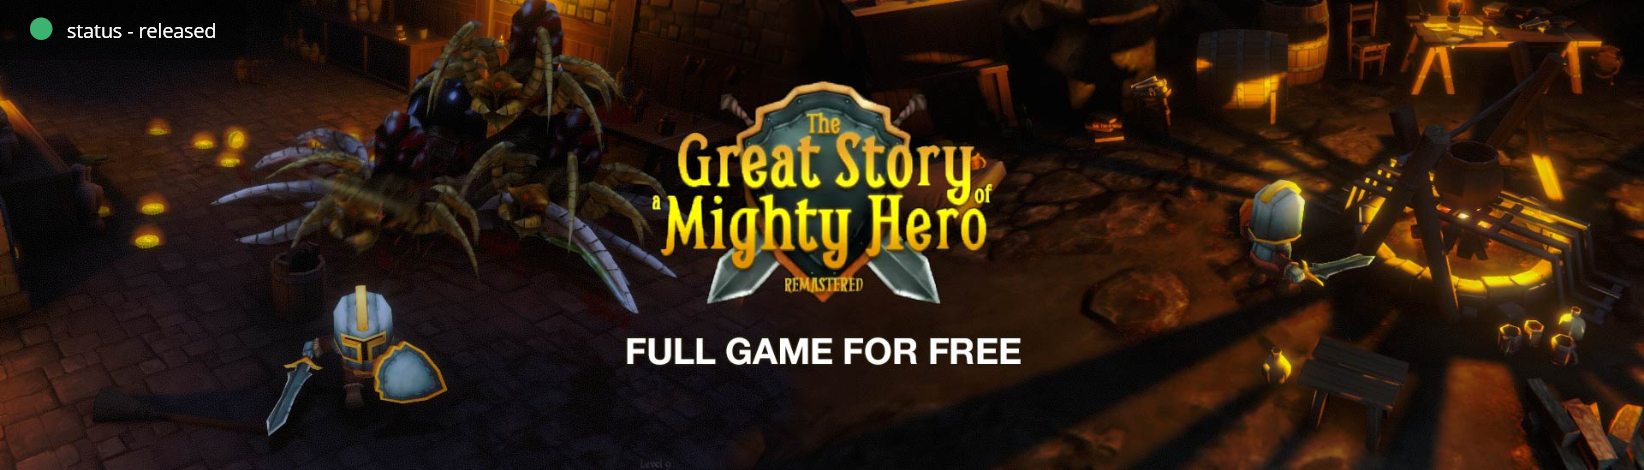 Screenshot_2019-05-09 The Great Story of a Mighty Hero - Remastered Indiegala Developers.png